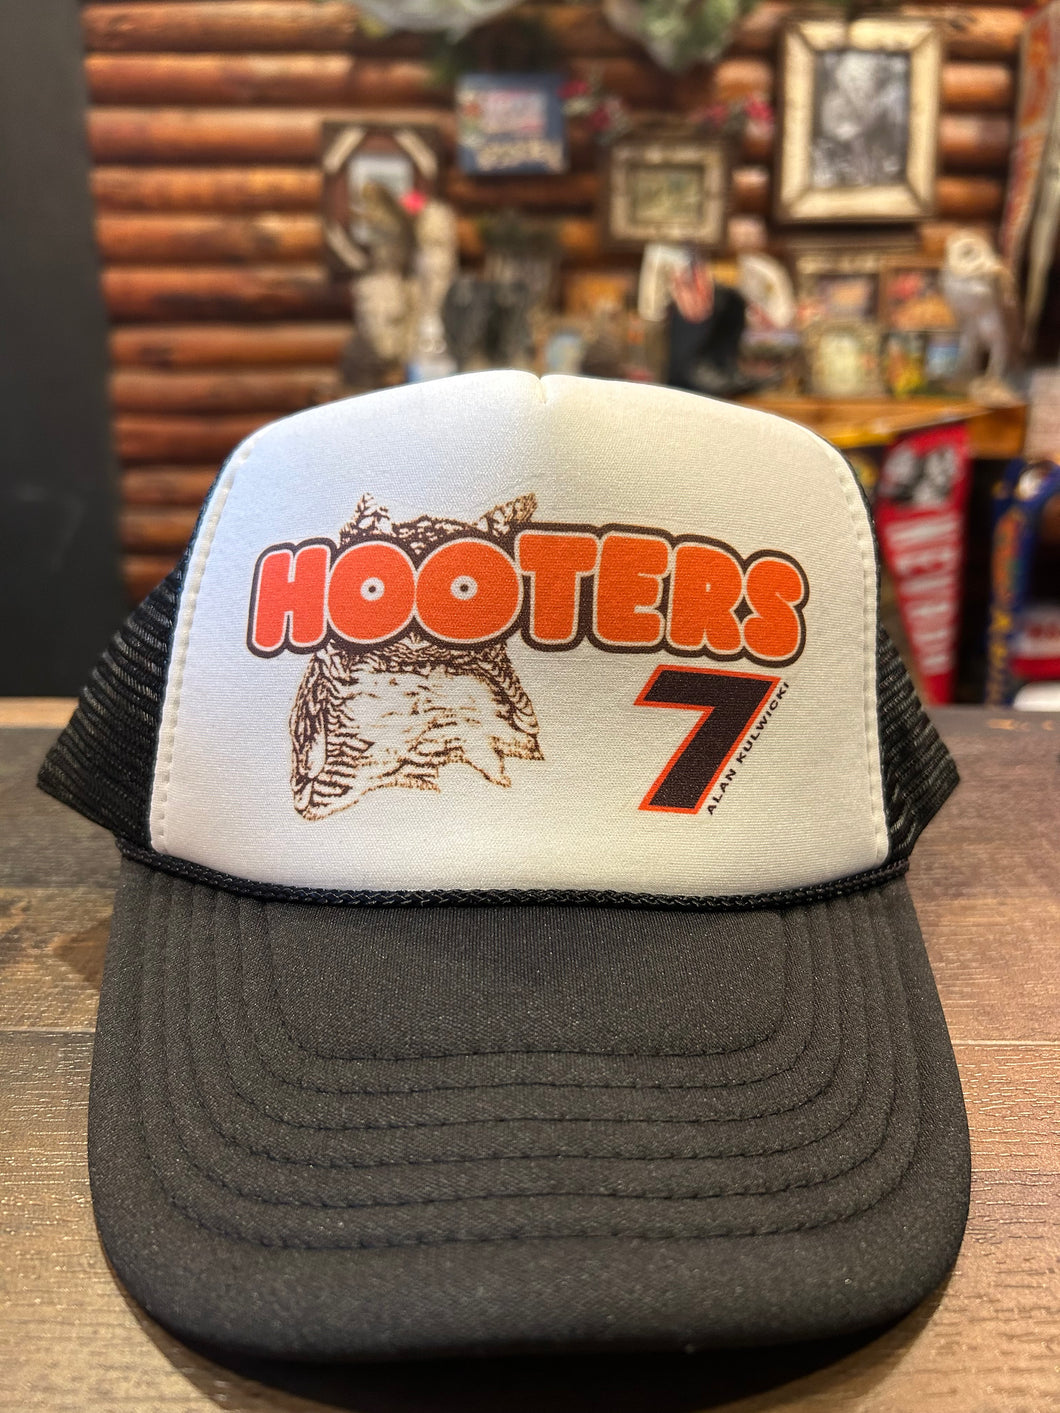 New Hooters Hat Black & White